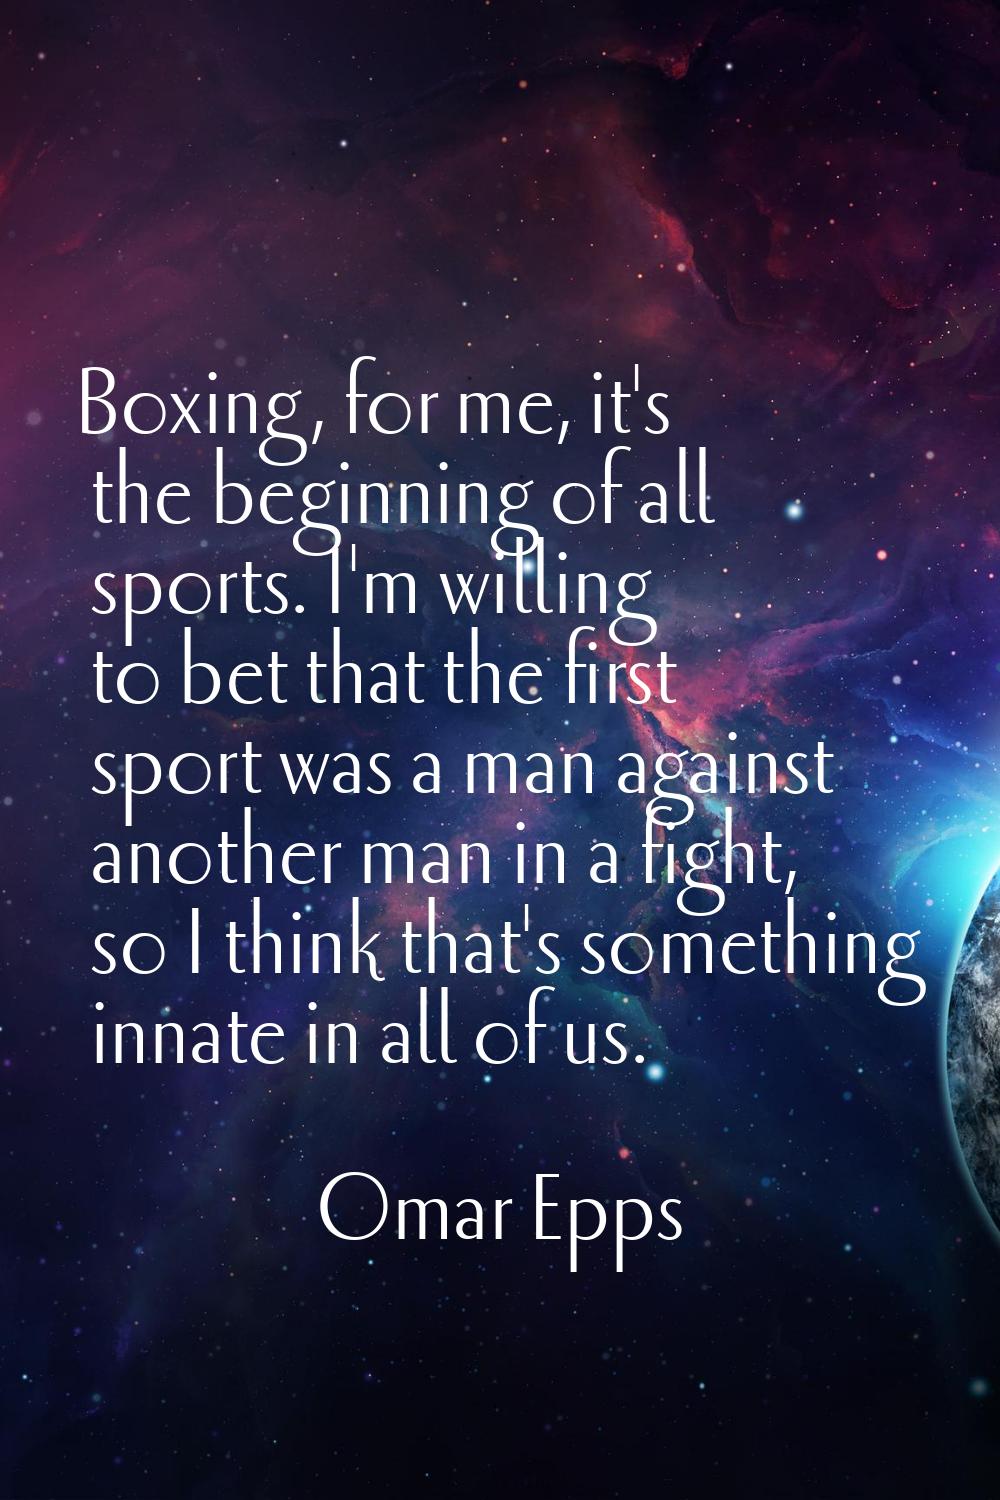 Boxing, for me, it's the beginning of all sports. I'm willing to bet that the first sport was a man